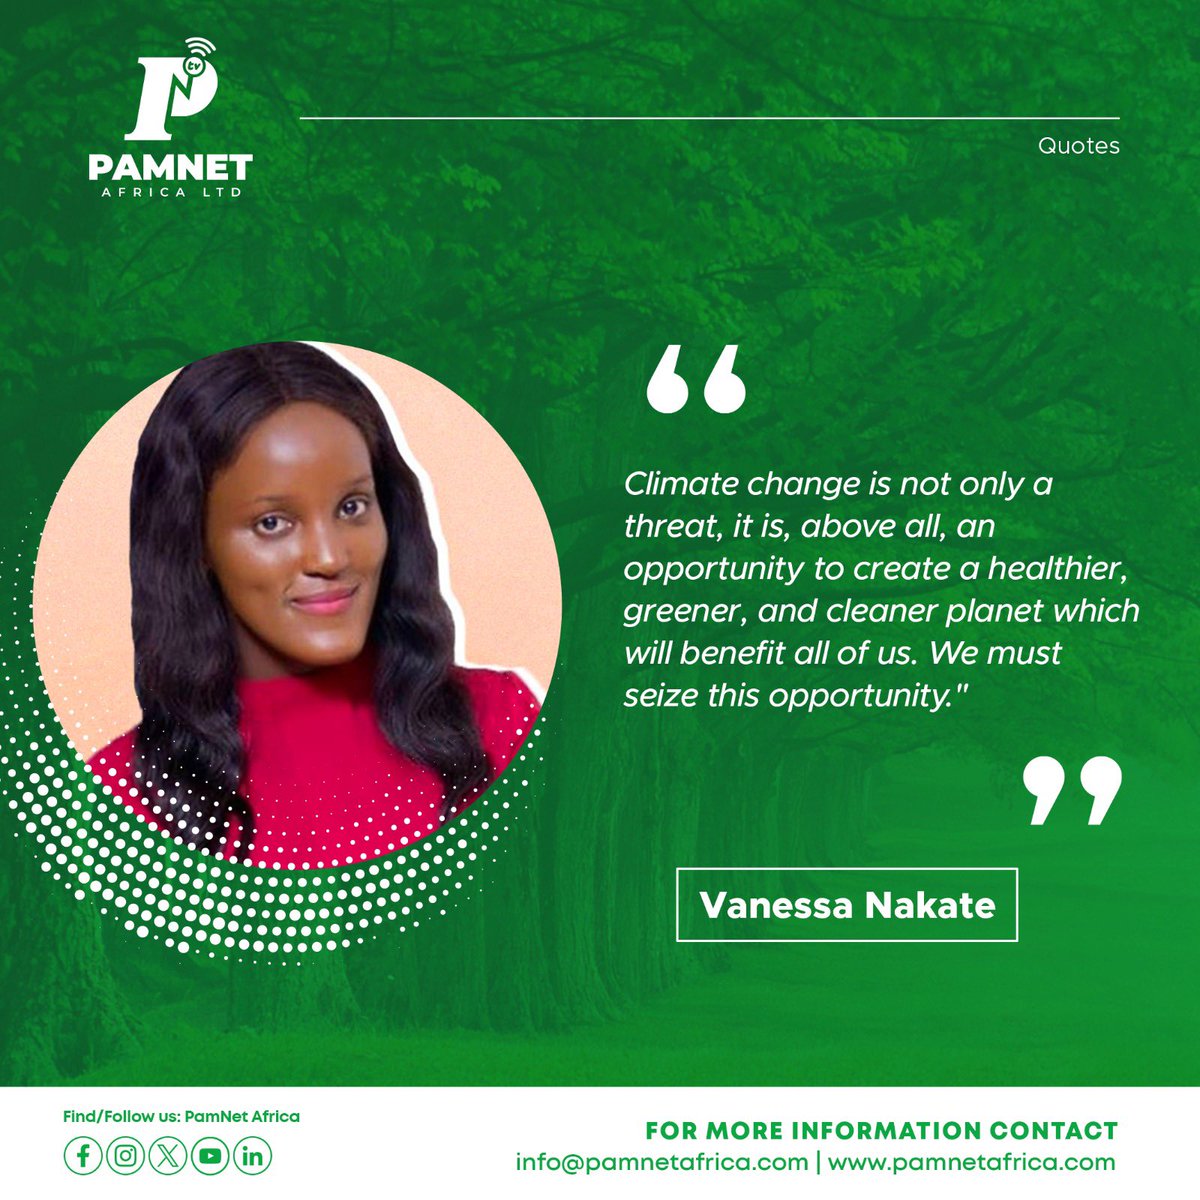 Climate change is a challenge, but @vanessanakate1 reminds us it’s also a chance for a healthier planet. What will YOU do to seize this opportunity? #pamnetafrica #actonclimate #actonclimatechange #vanessanakete #climatechangeawareness #climatechangeaction #climatequotes